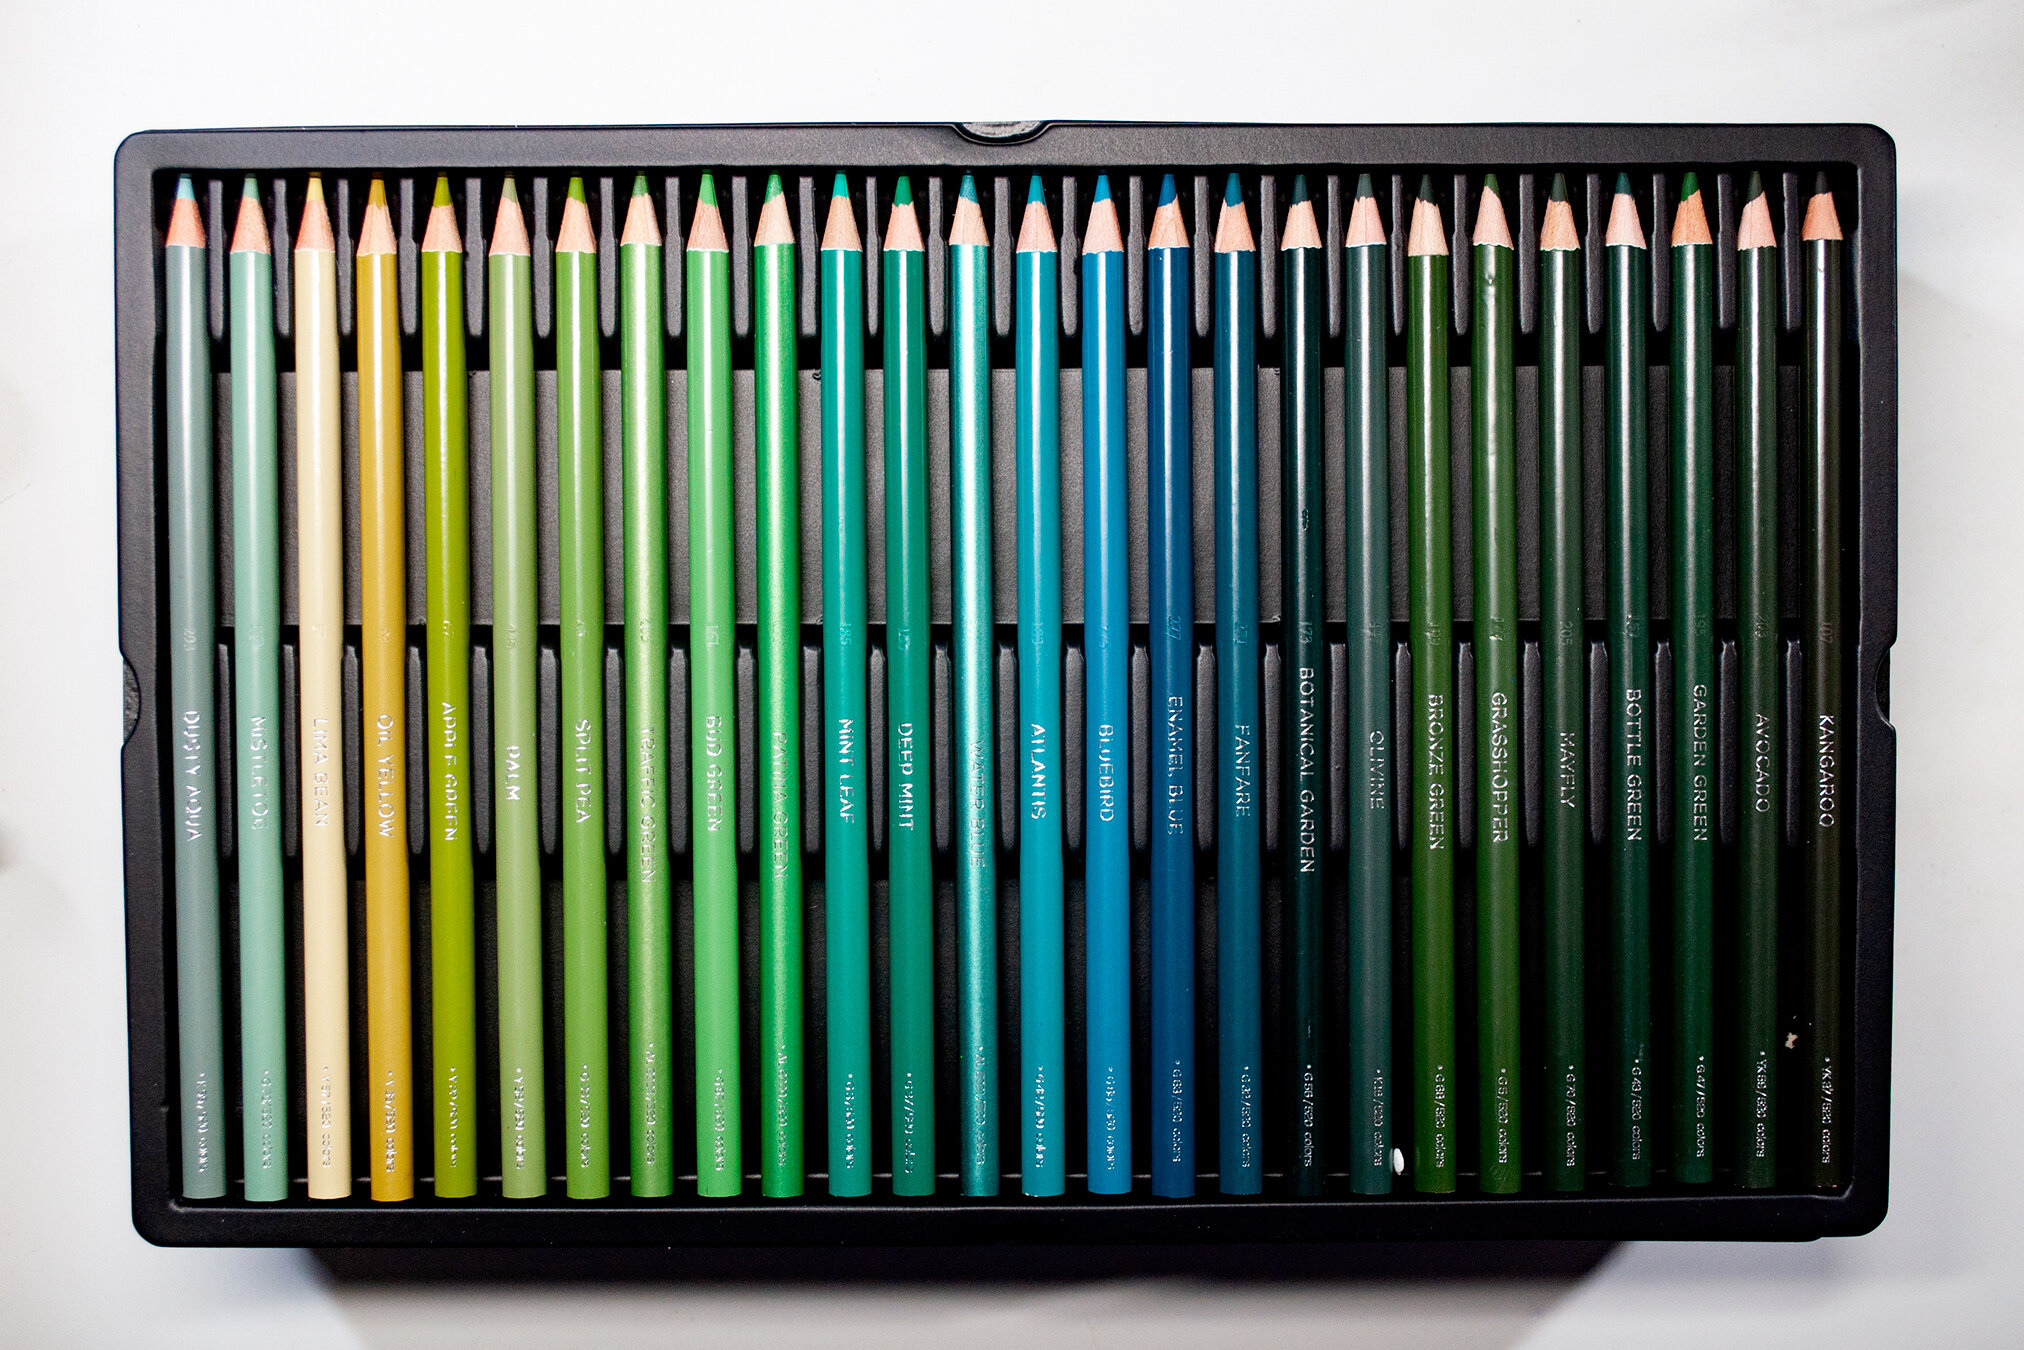 520 Brutfuner Professional 260 Colored Pencils Andstal Soft Core Color  Pencil For Artists Coloring Sketching Drawing